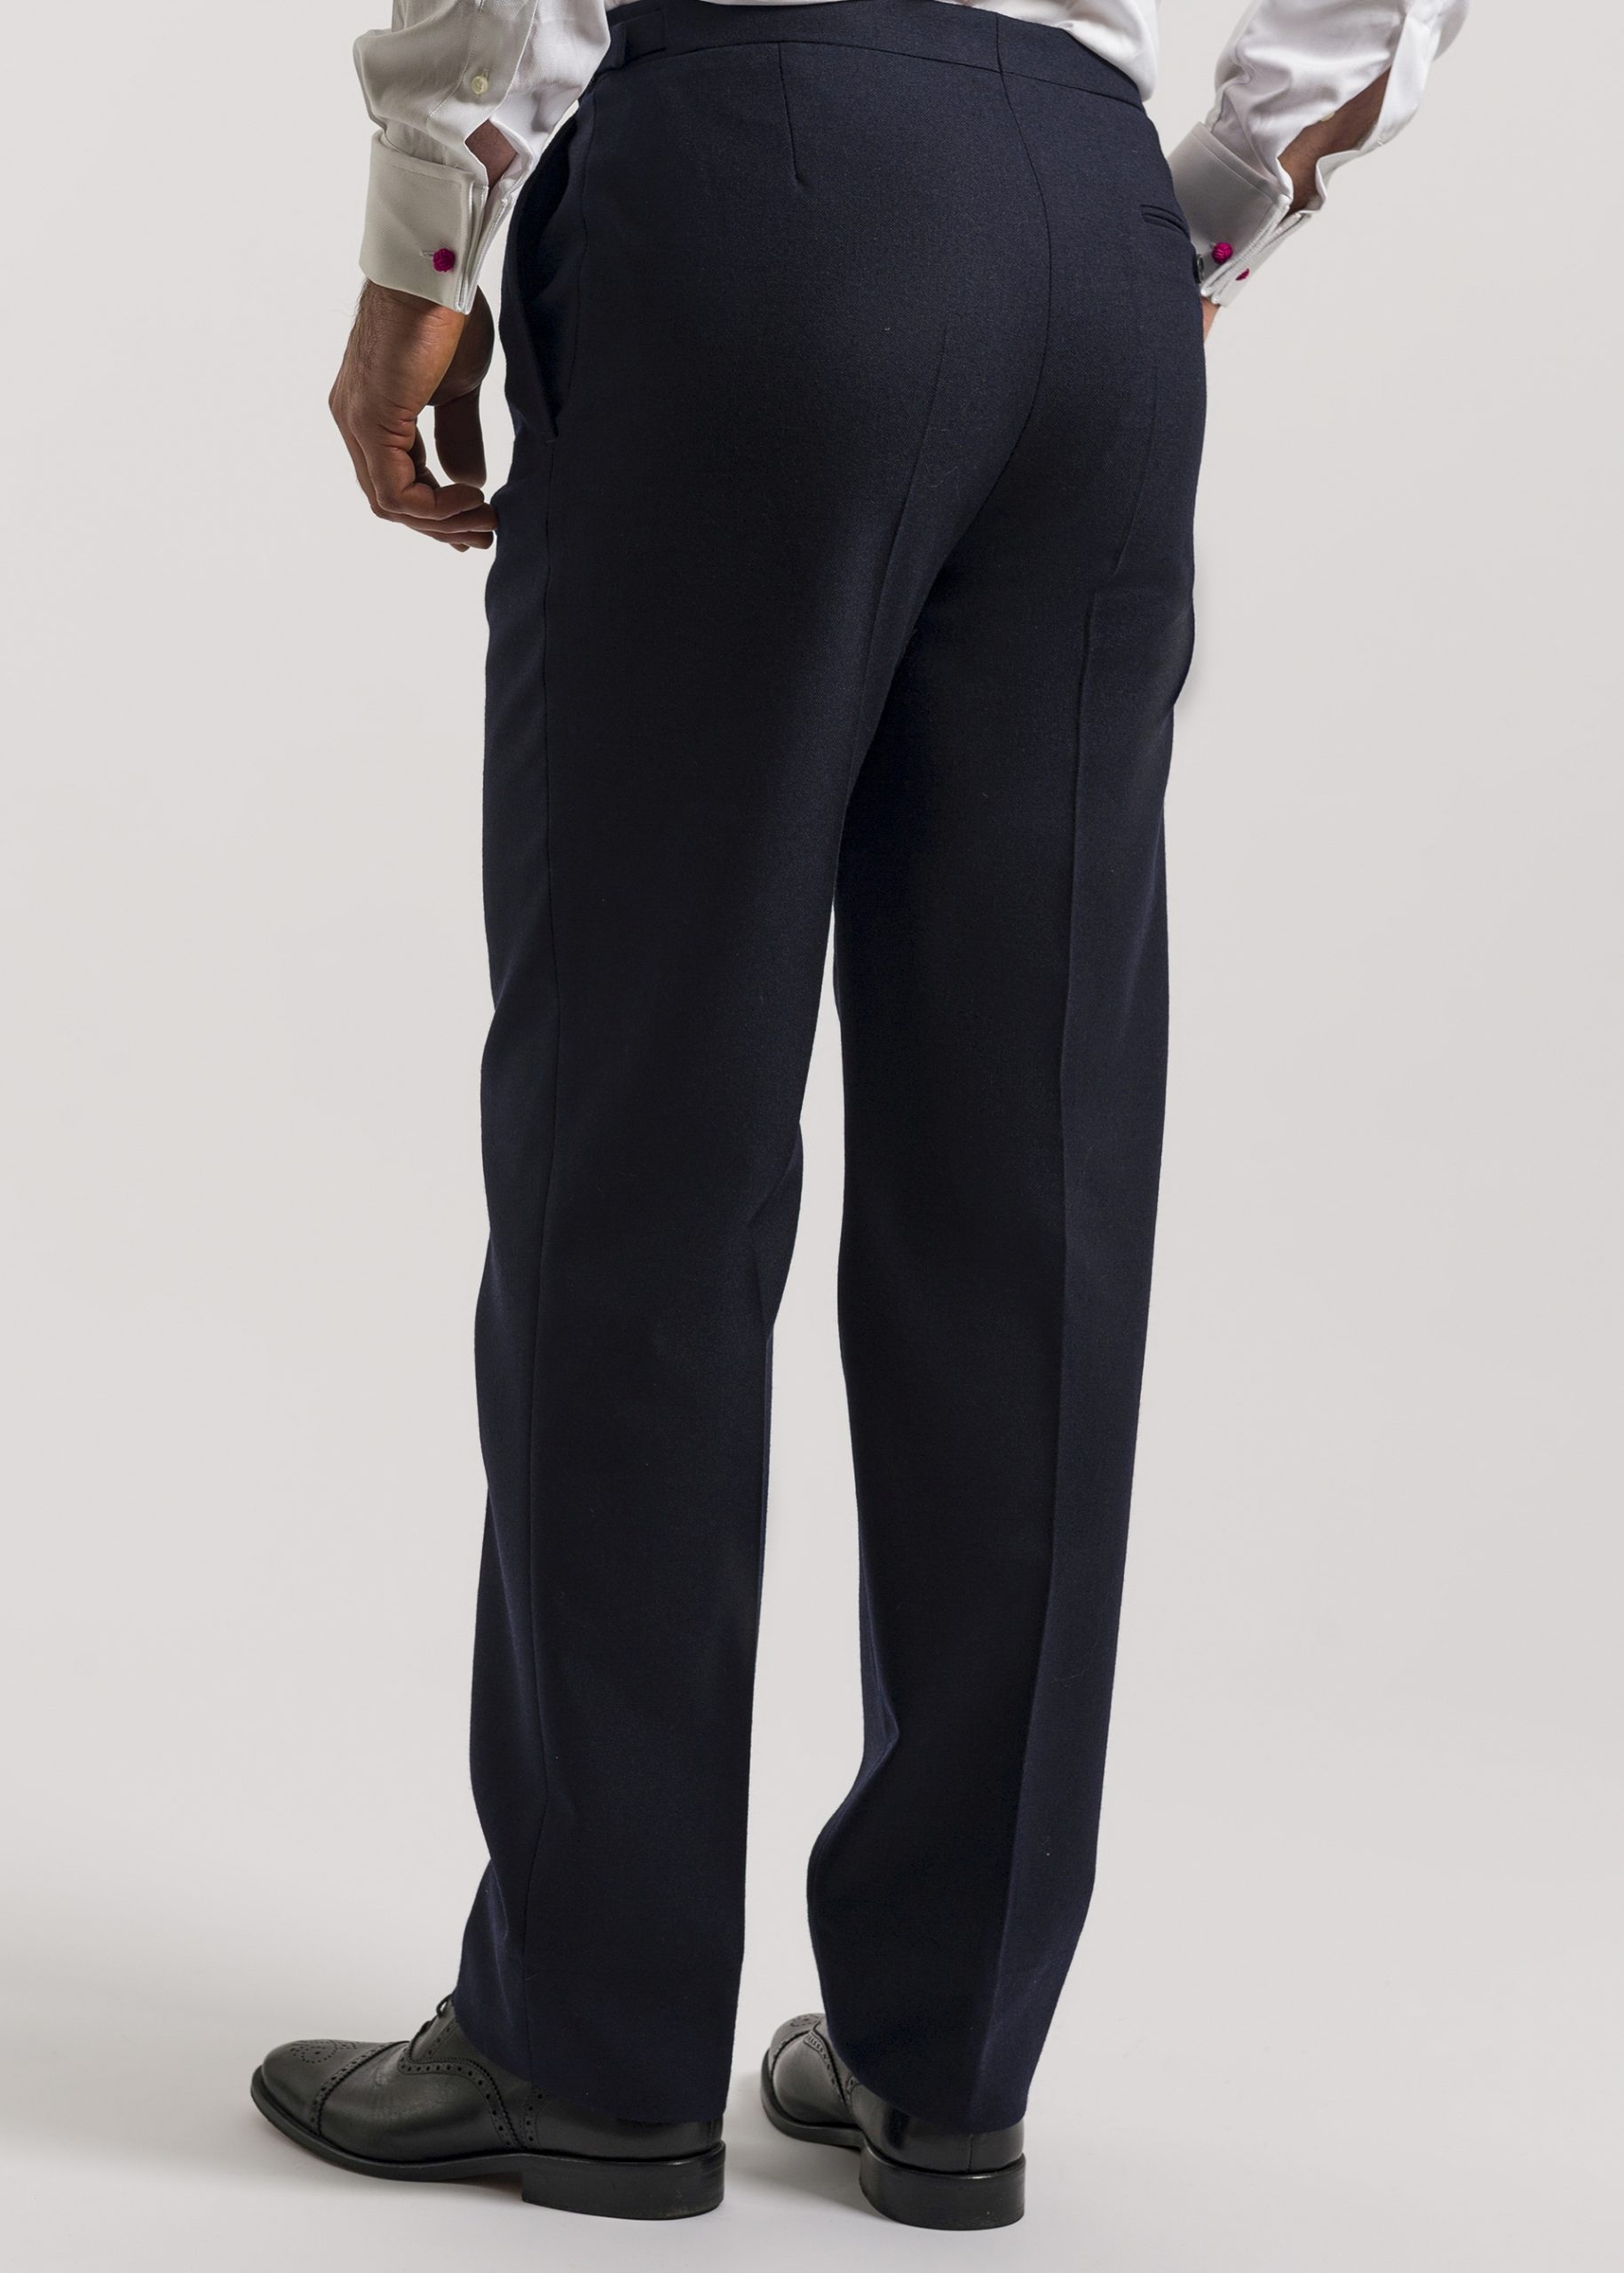 Roderick Charles classic fit navy suit trousers